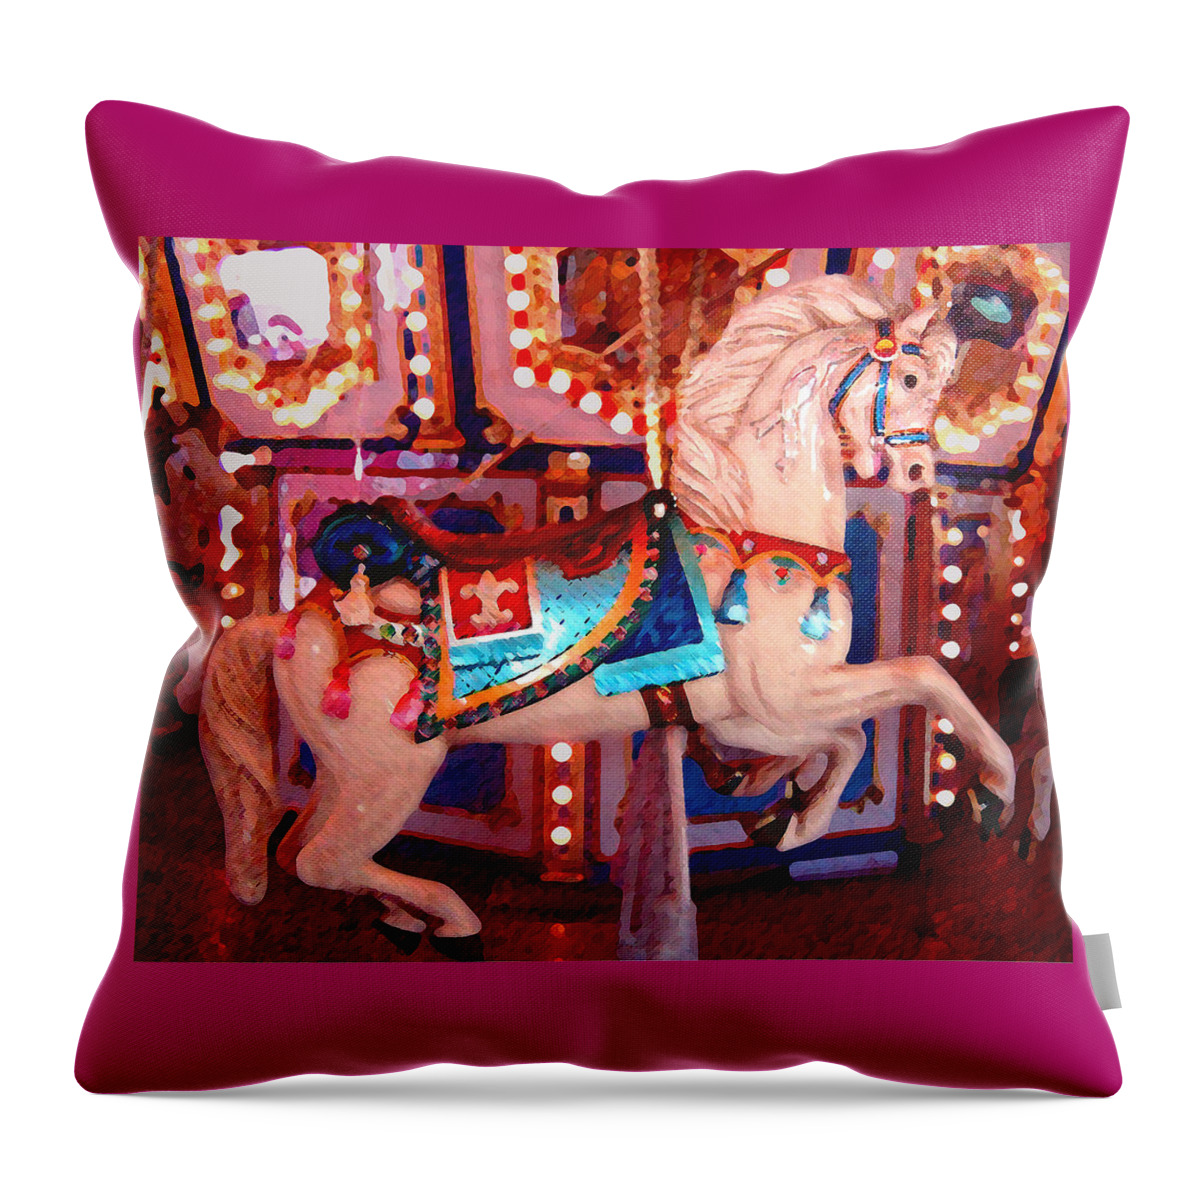 Horses Throw Pillow featuring the painting White Carousel Horse by Amy Vangsgard